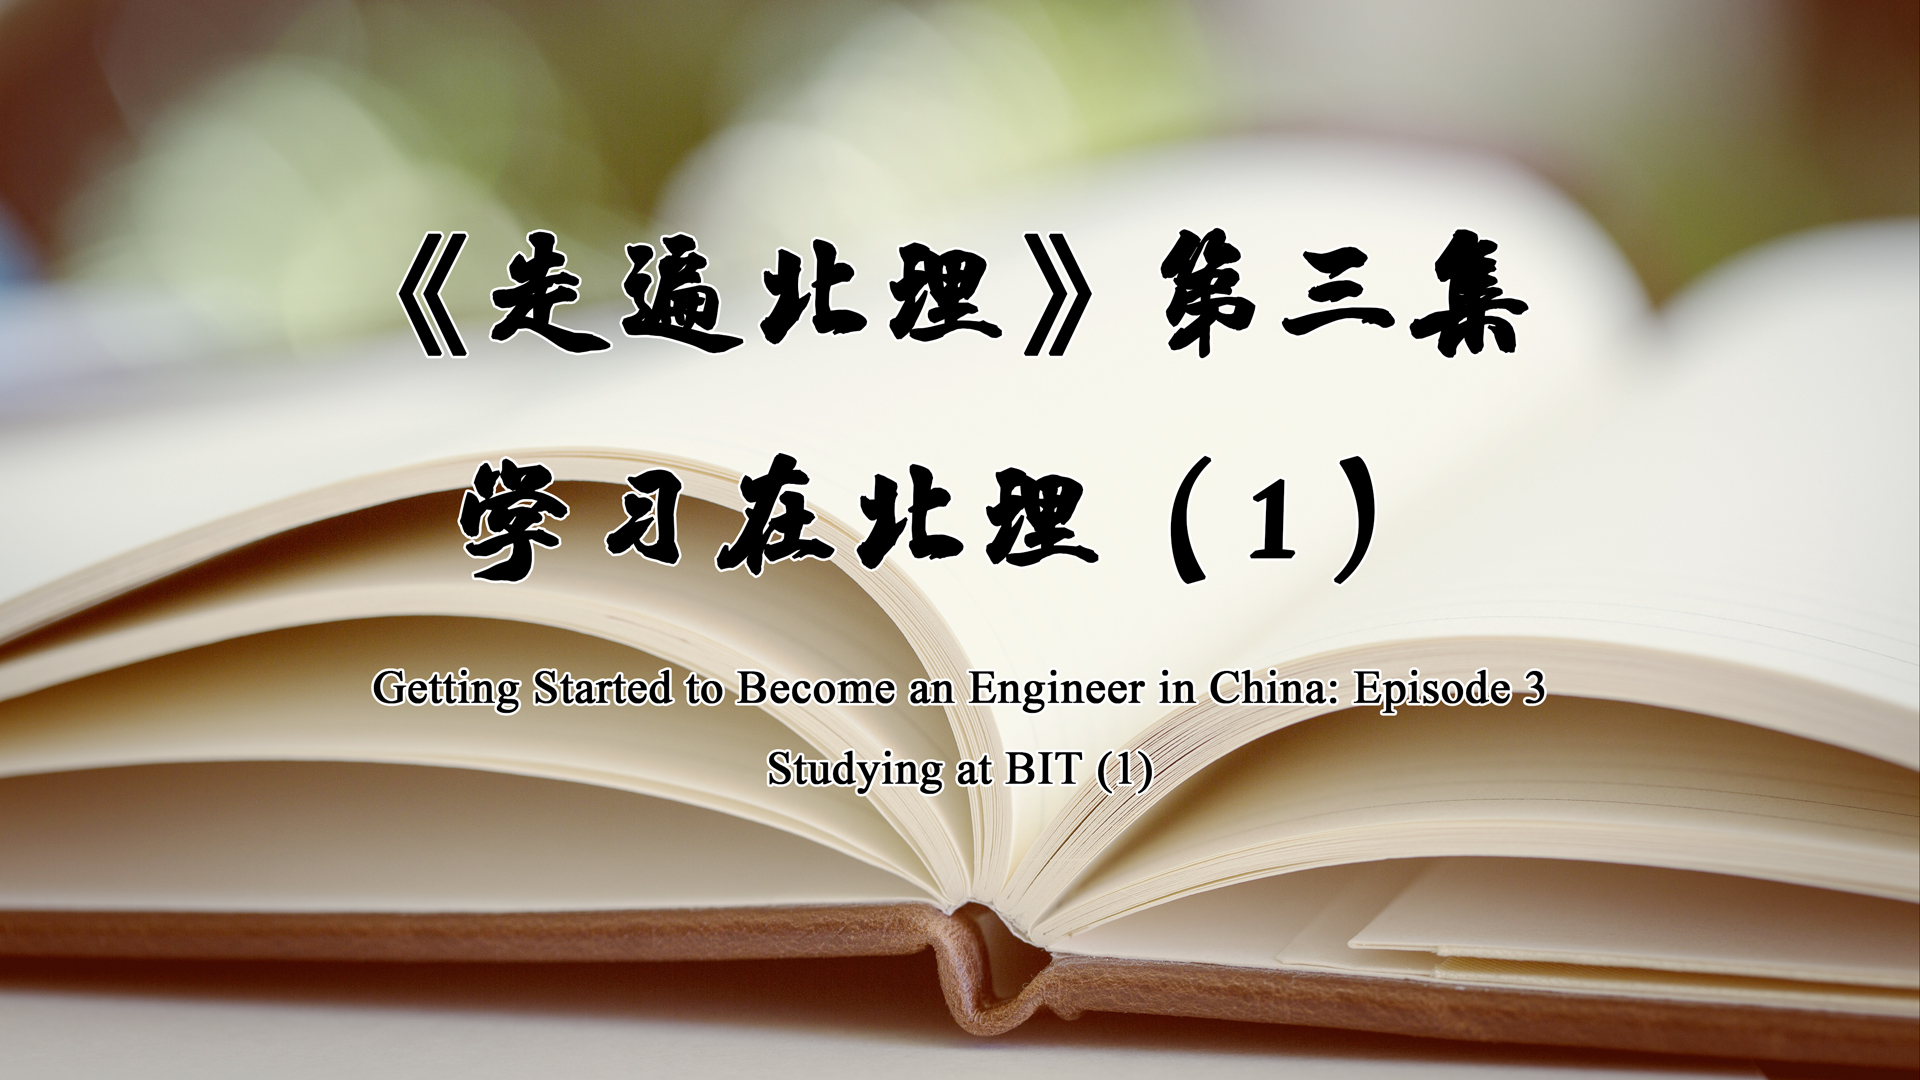 Getting started to become an engineer in China-Episode 3: Studying at BIT(1)